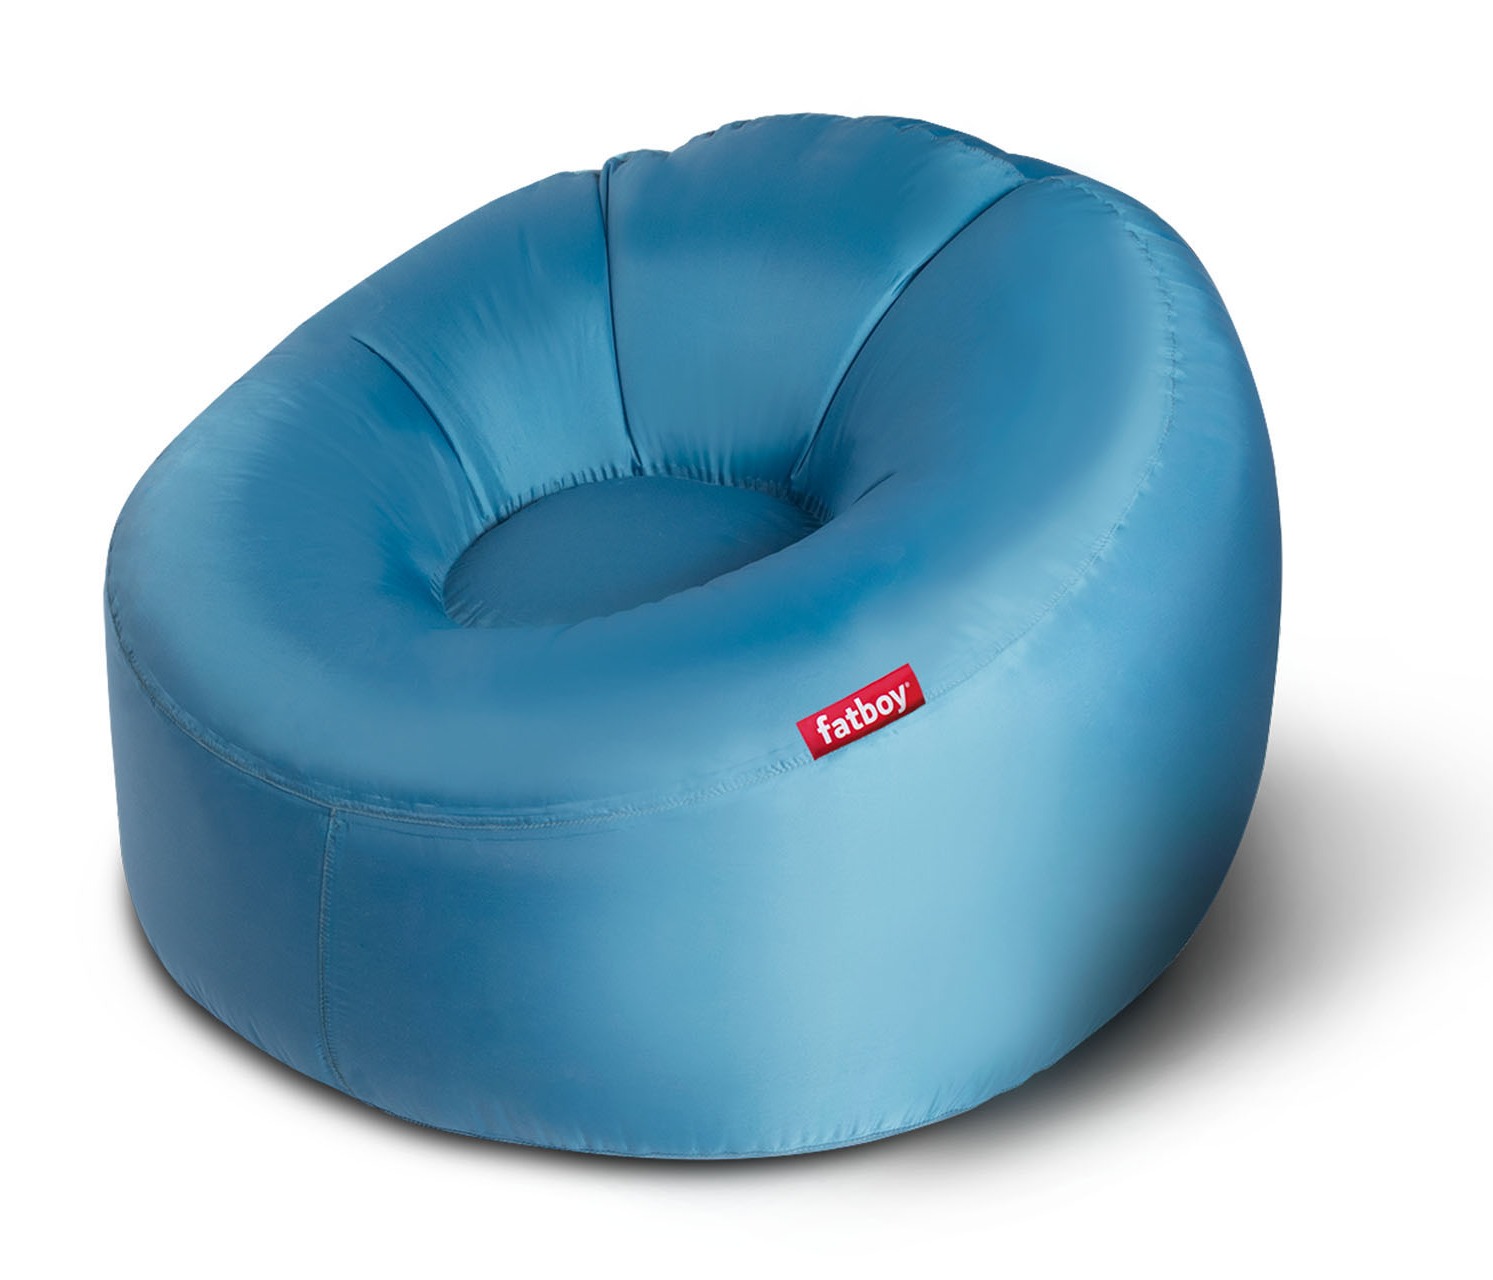 This blow-up Lamzac chair, above, from fatboy.com could be yours for £89